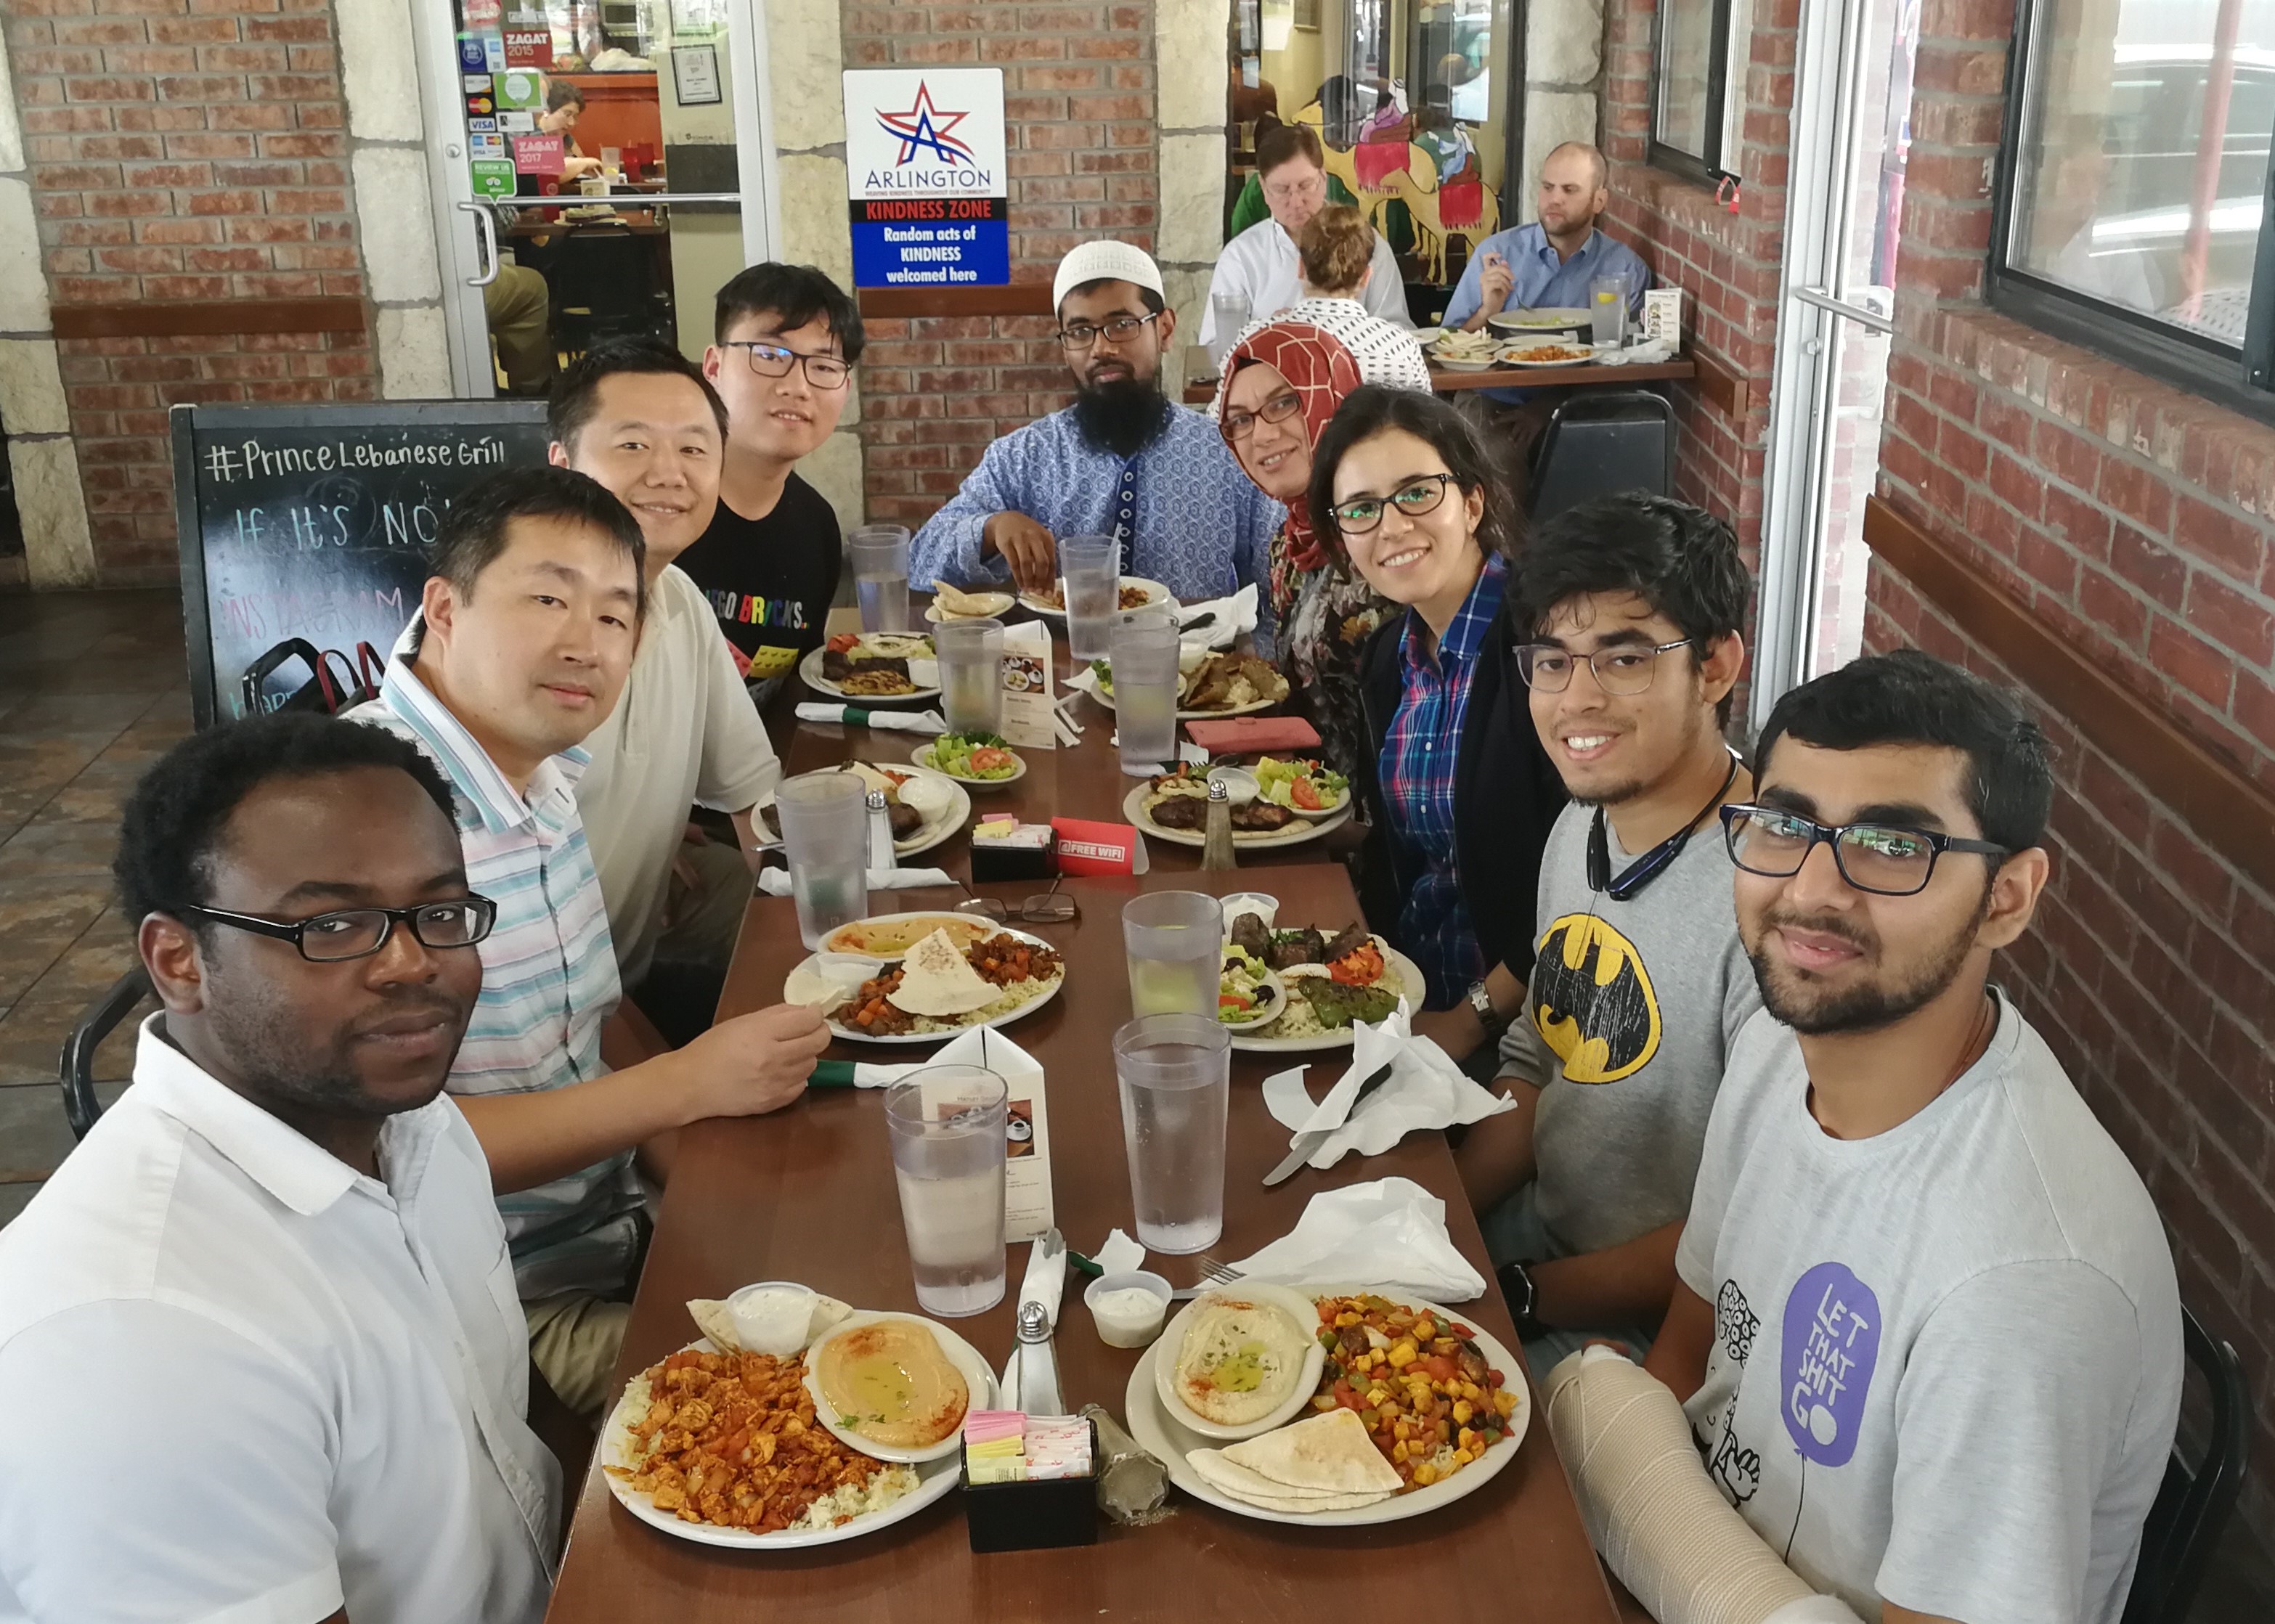 Prof. Qili Zhu and his student from Shanghai Jiaotong University, stopping by today before their connection flight to Santa Fe for attending COLING (Aug. 2018)